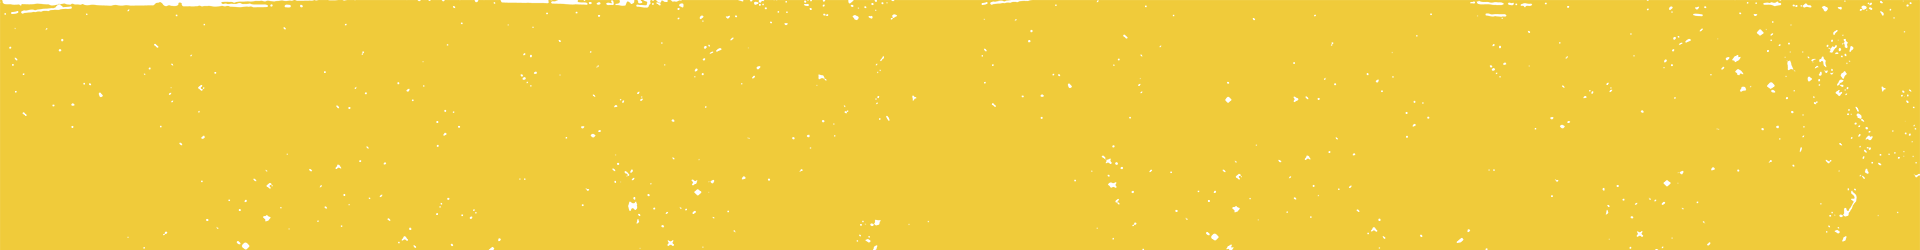 paint splat footer background